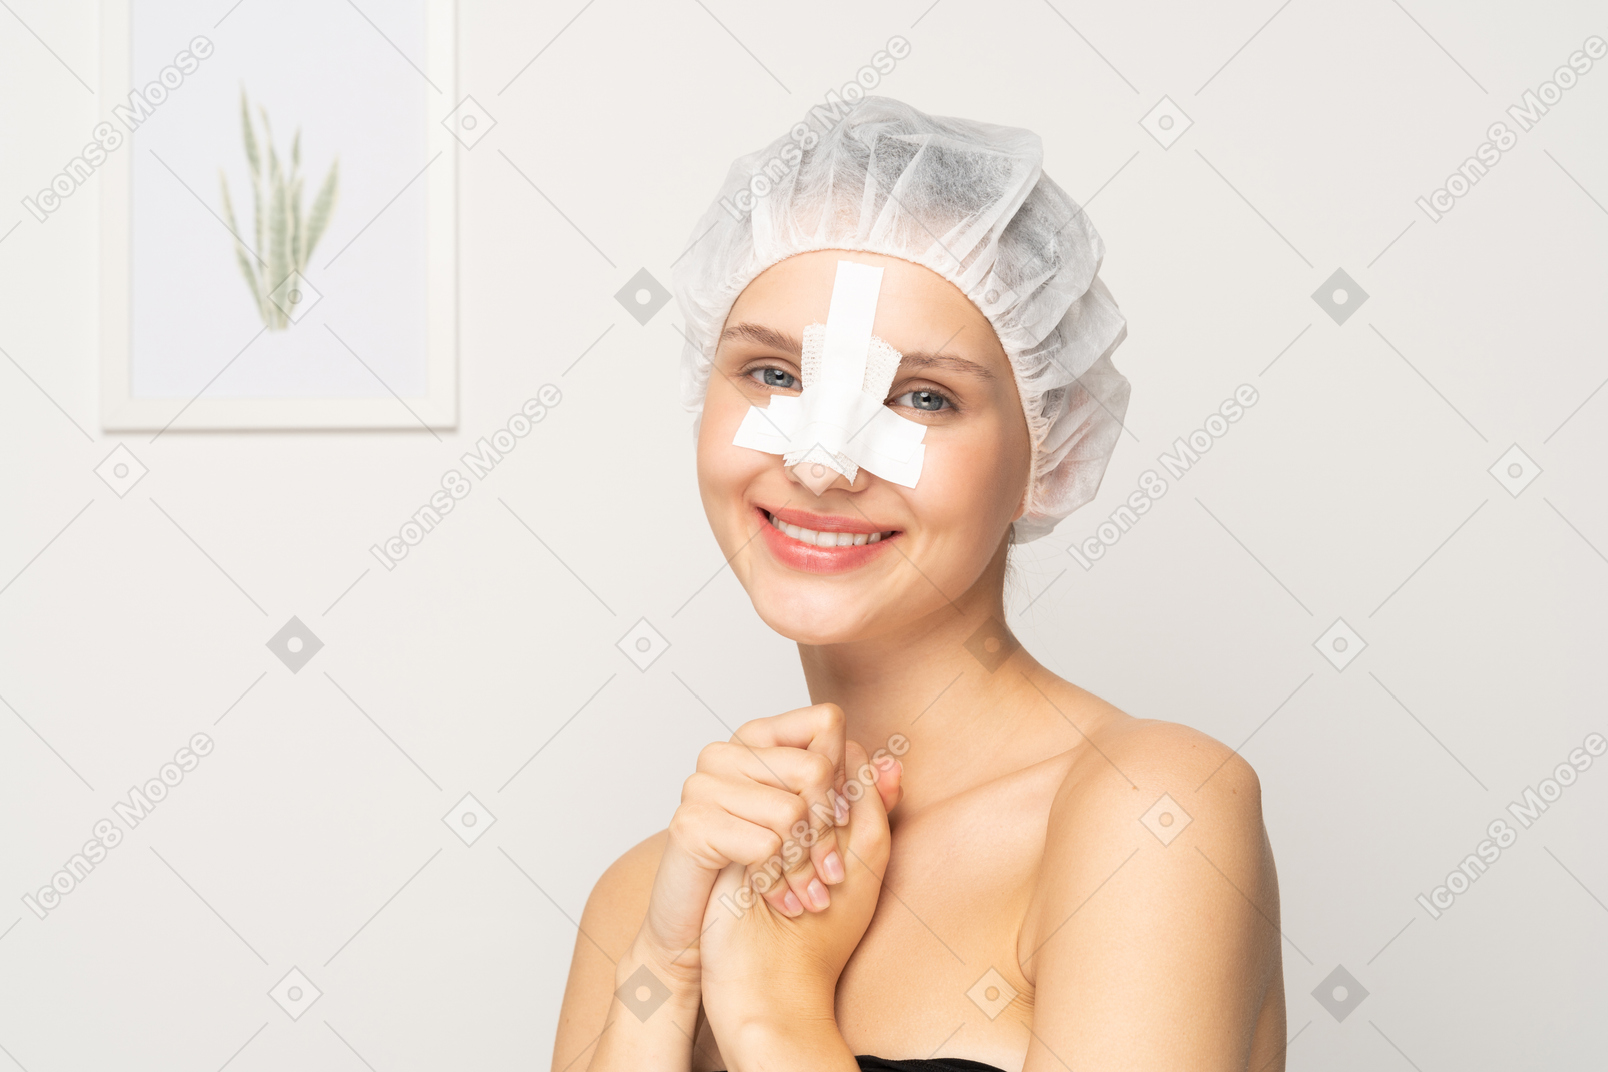 Smiling female patient with bandaged nose